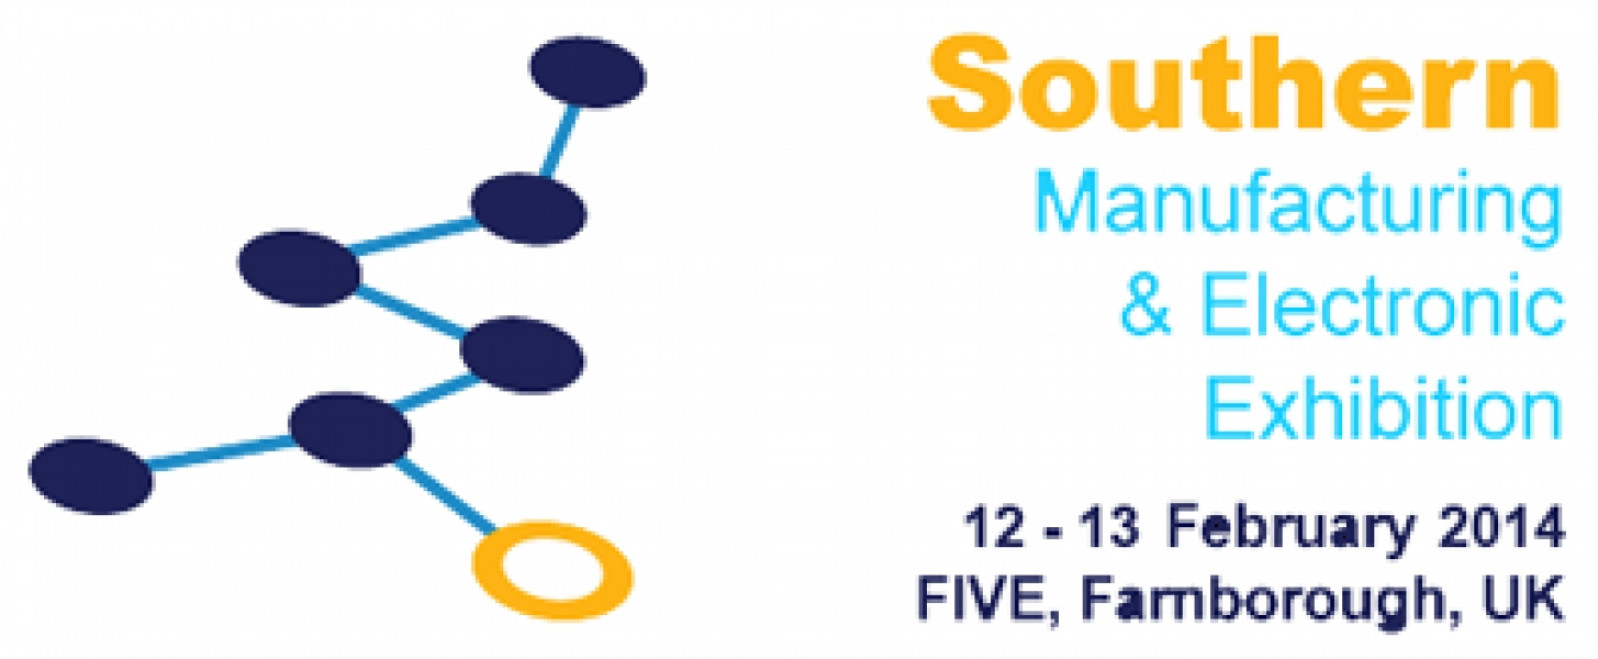 Eng-IT/SpaceClaim Southern Manufacturing 2014